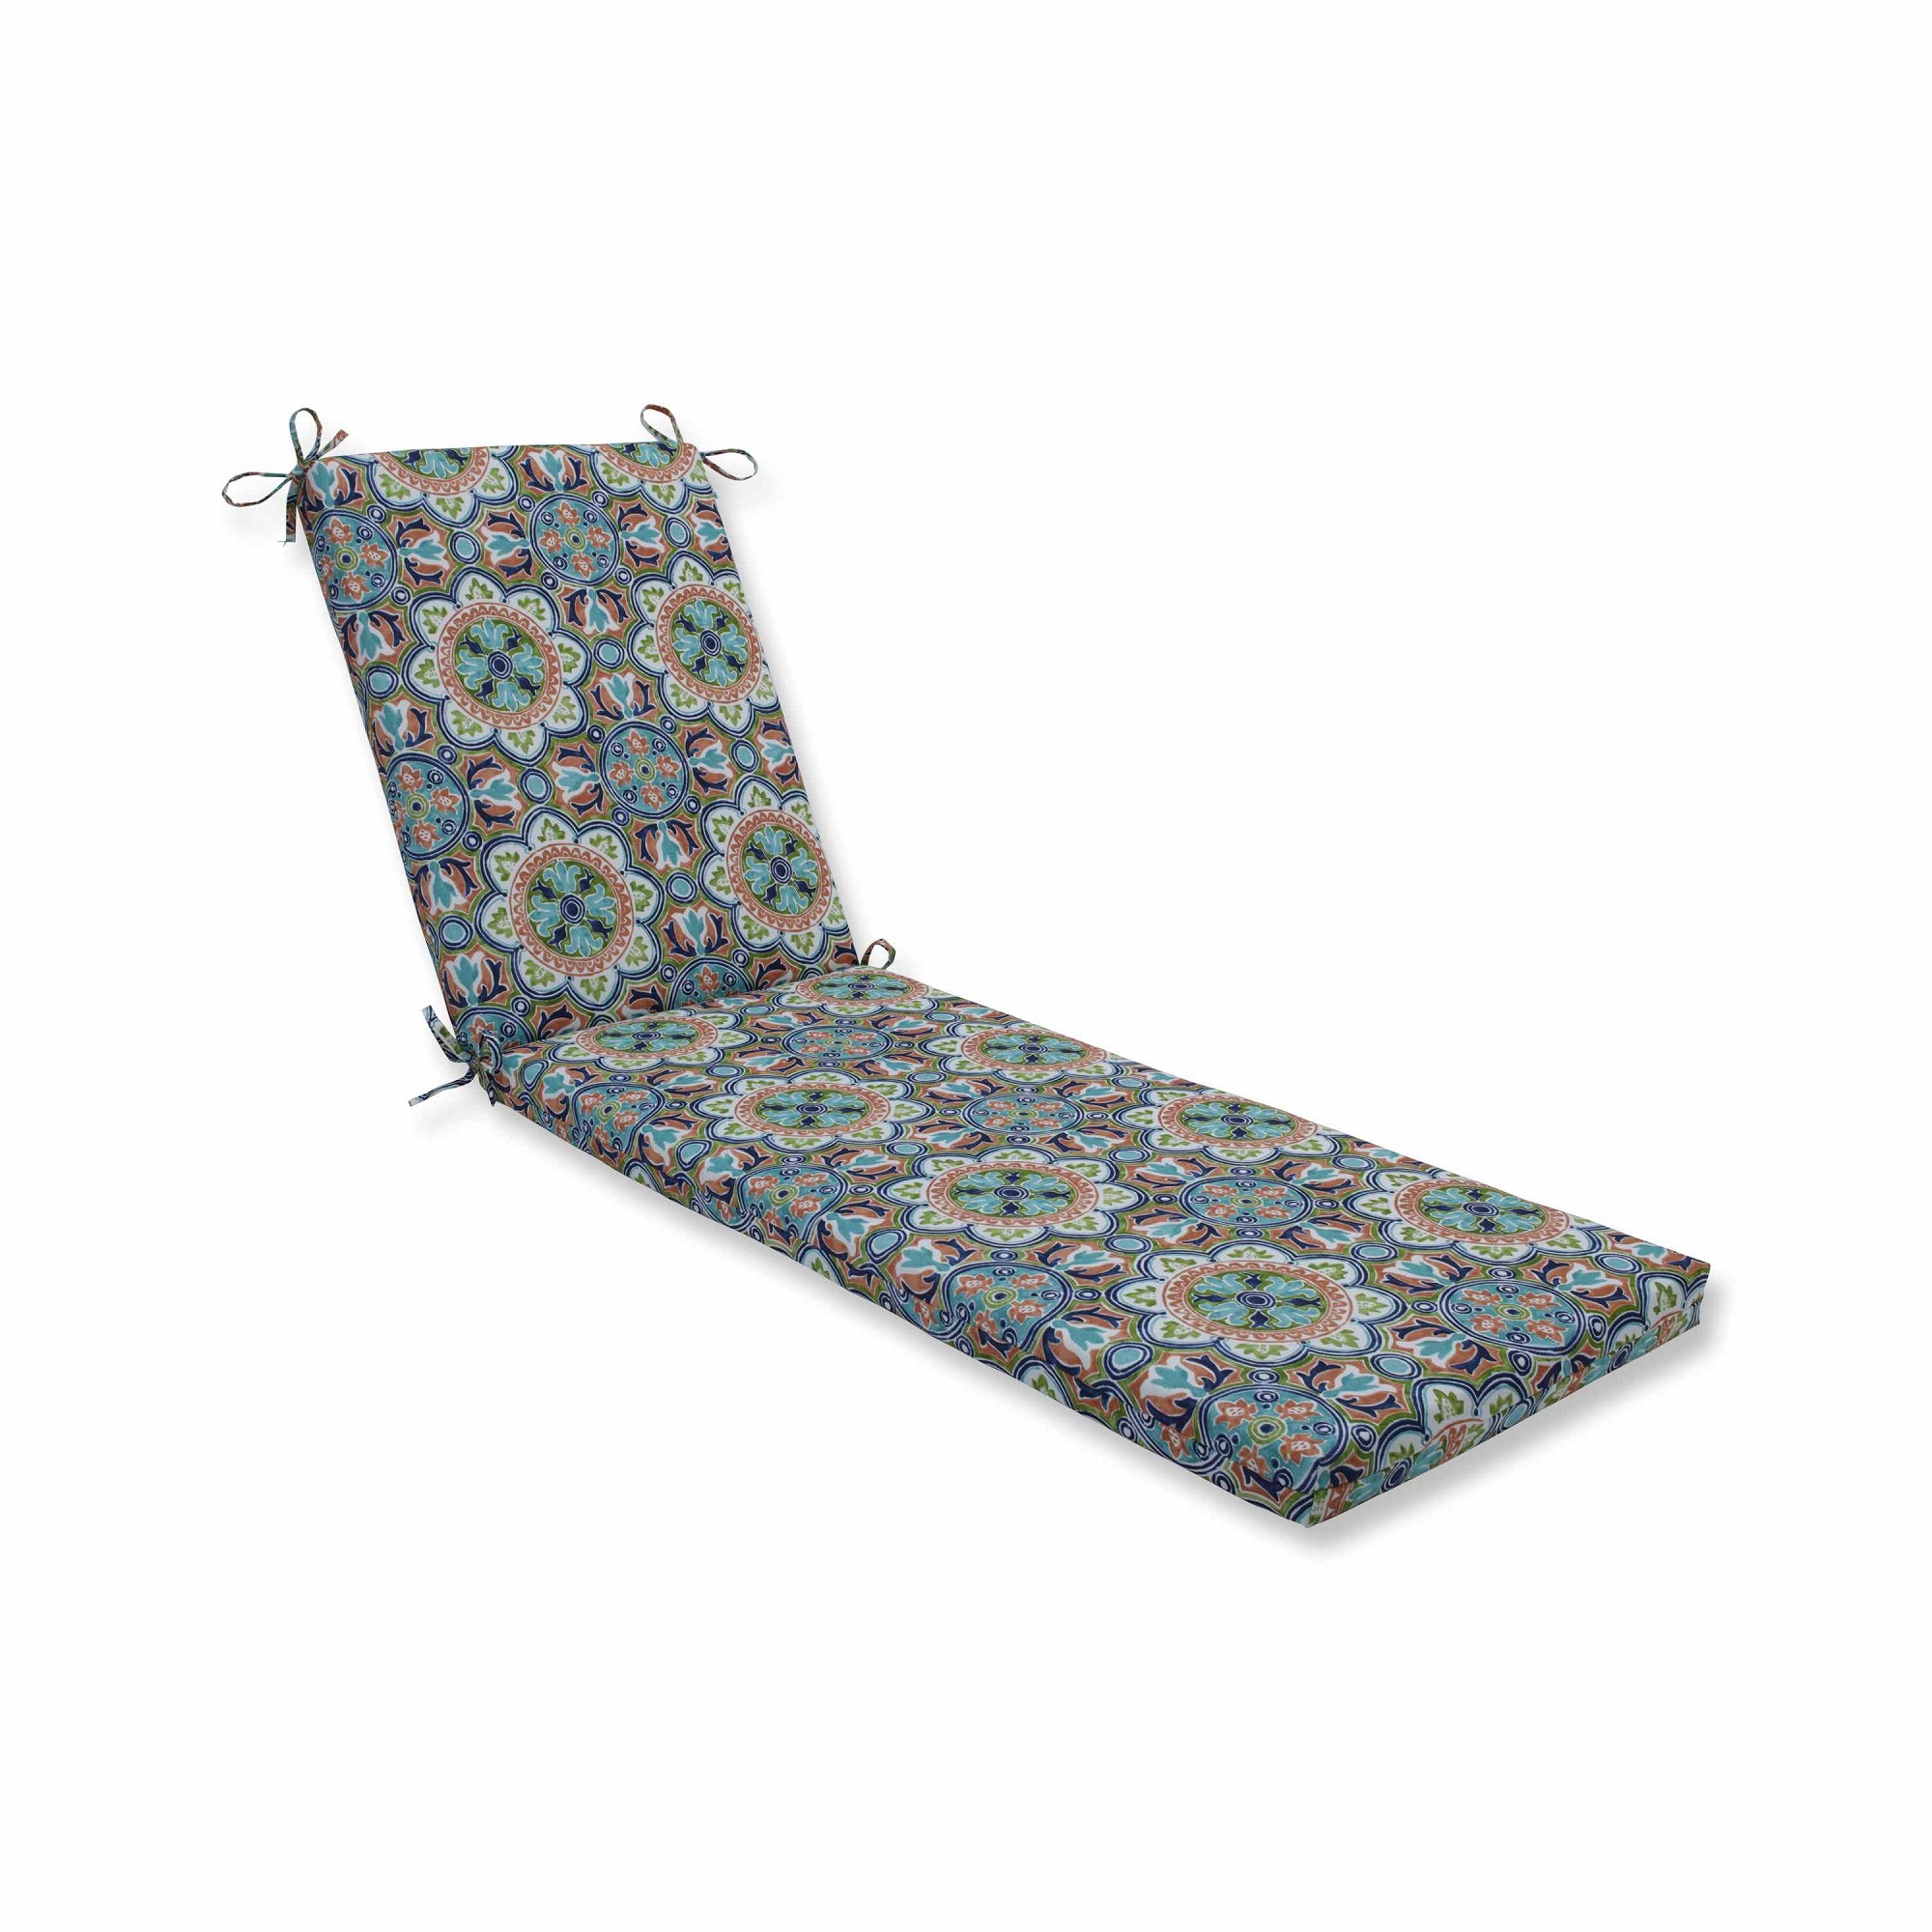 80" Blue and Green Chaise Lounge Cushion with Ties - image 1 of 3